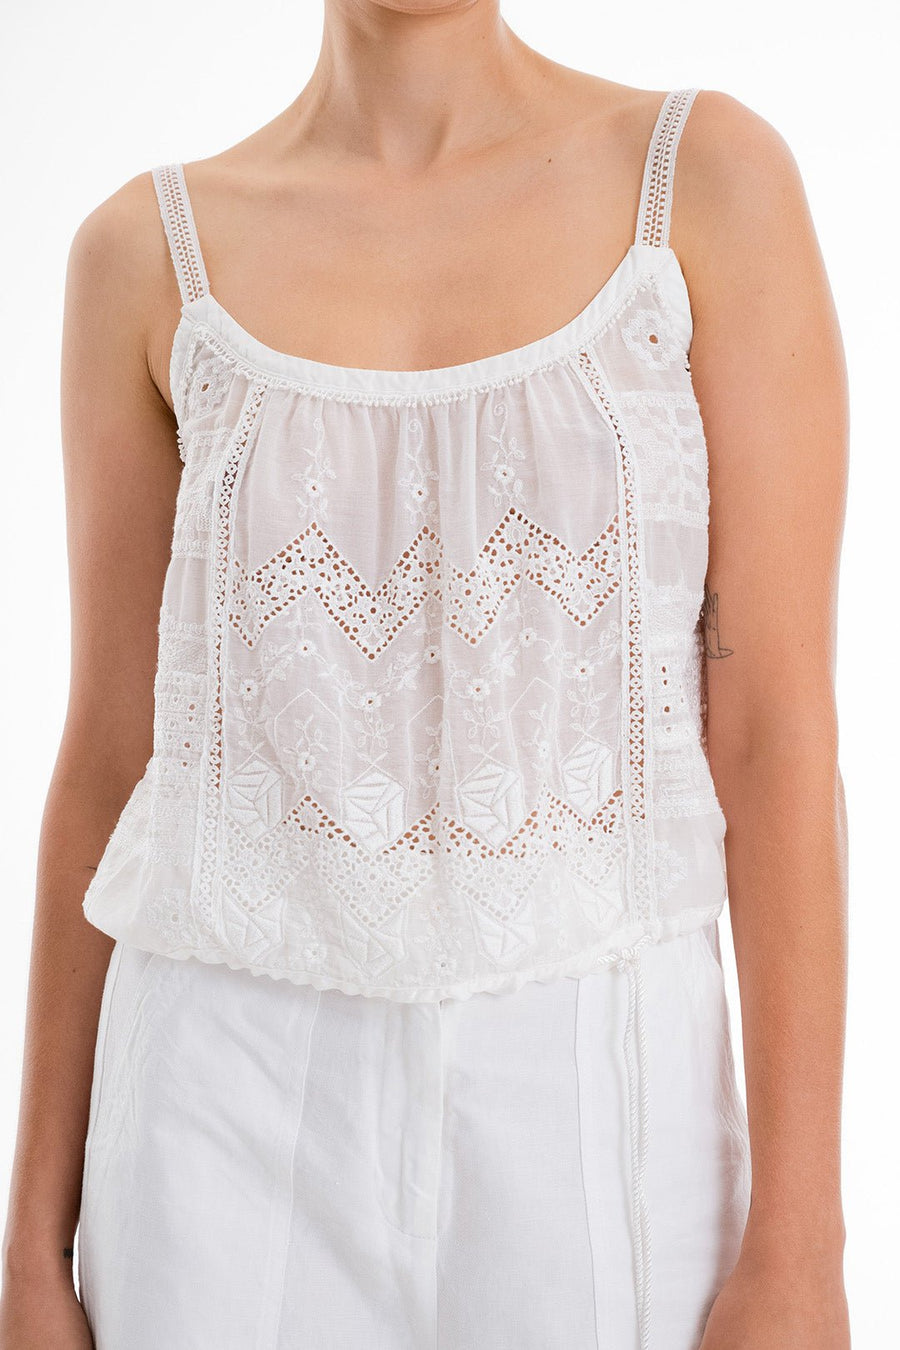 SKYE CAMI, WHITE - Burning Torch Online Boutique